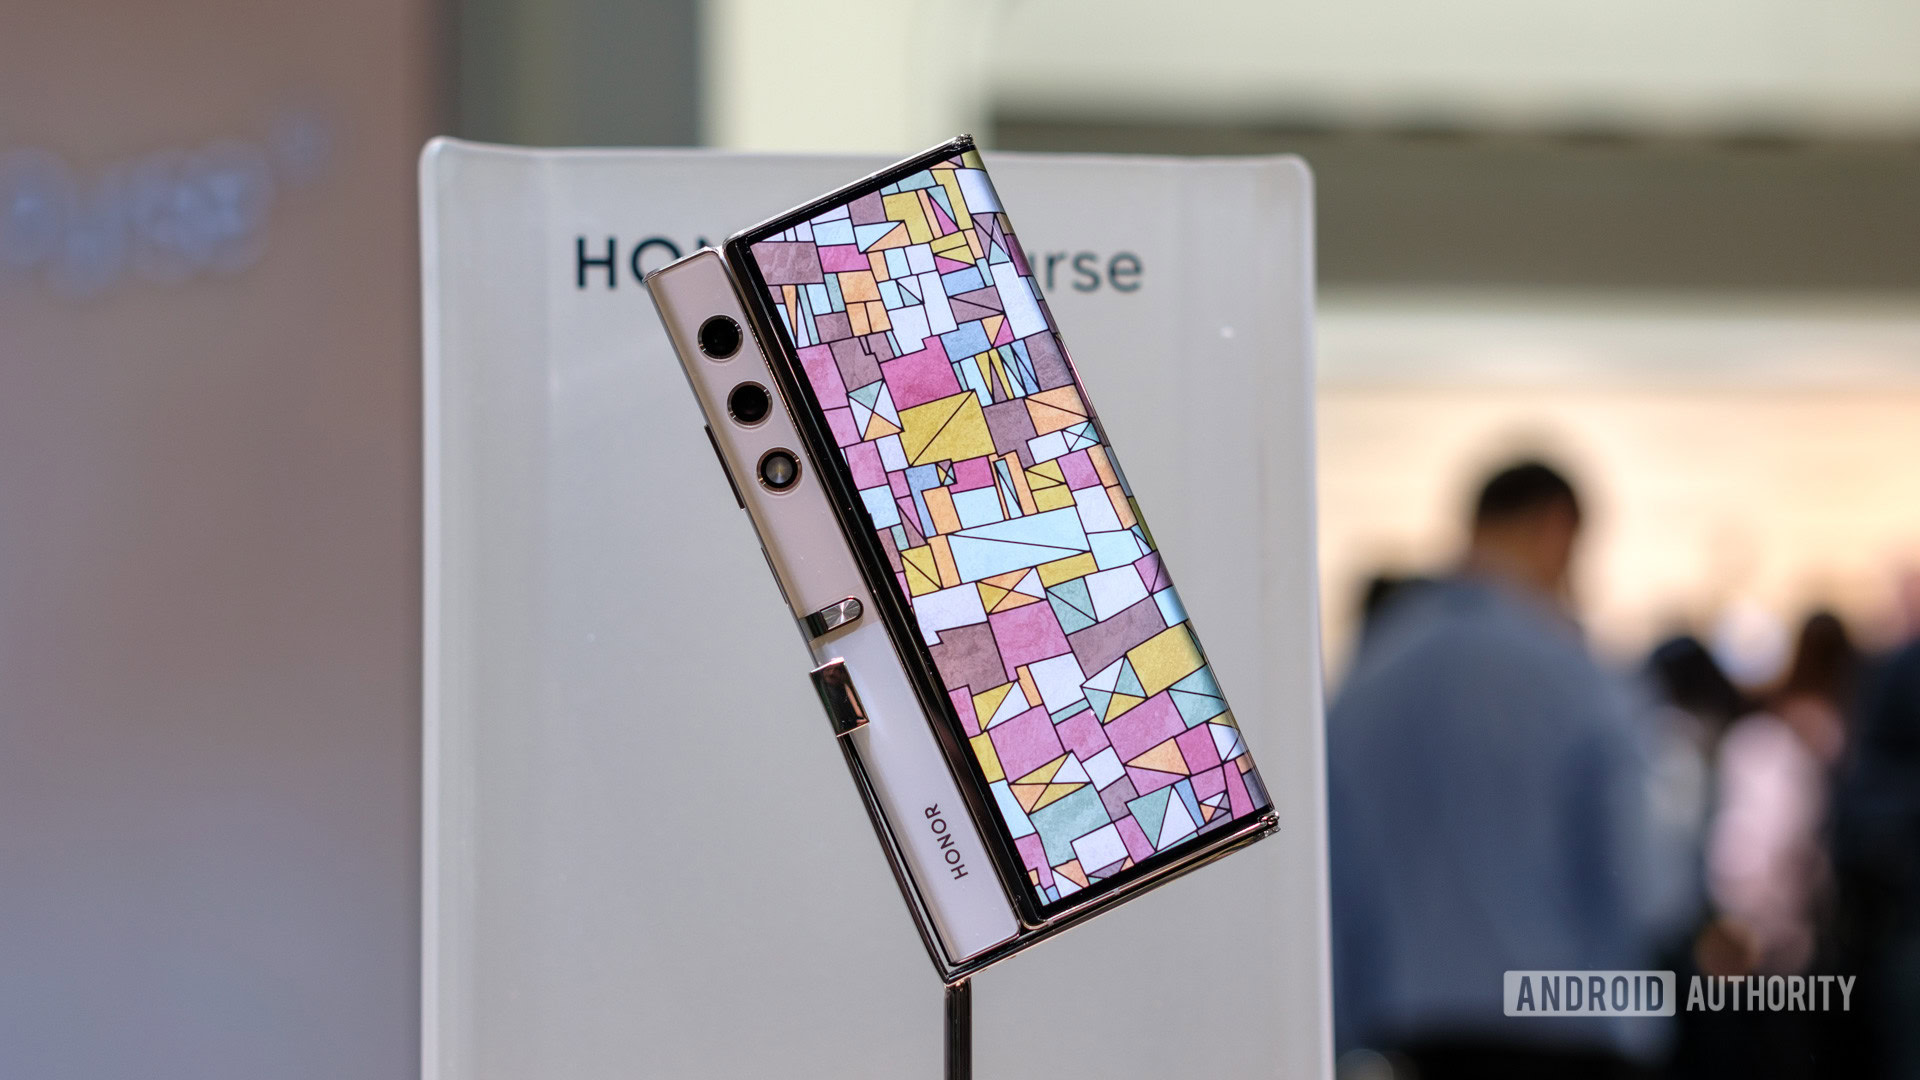 Honor's V Purse is a fashion-inspired foldable concept phone - The Verge